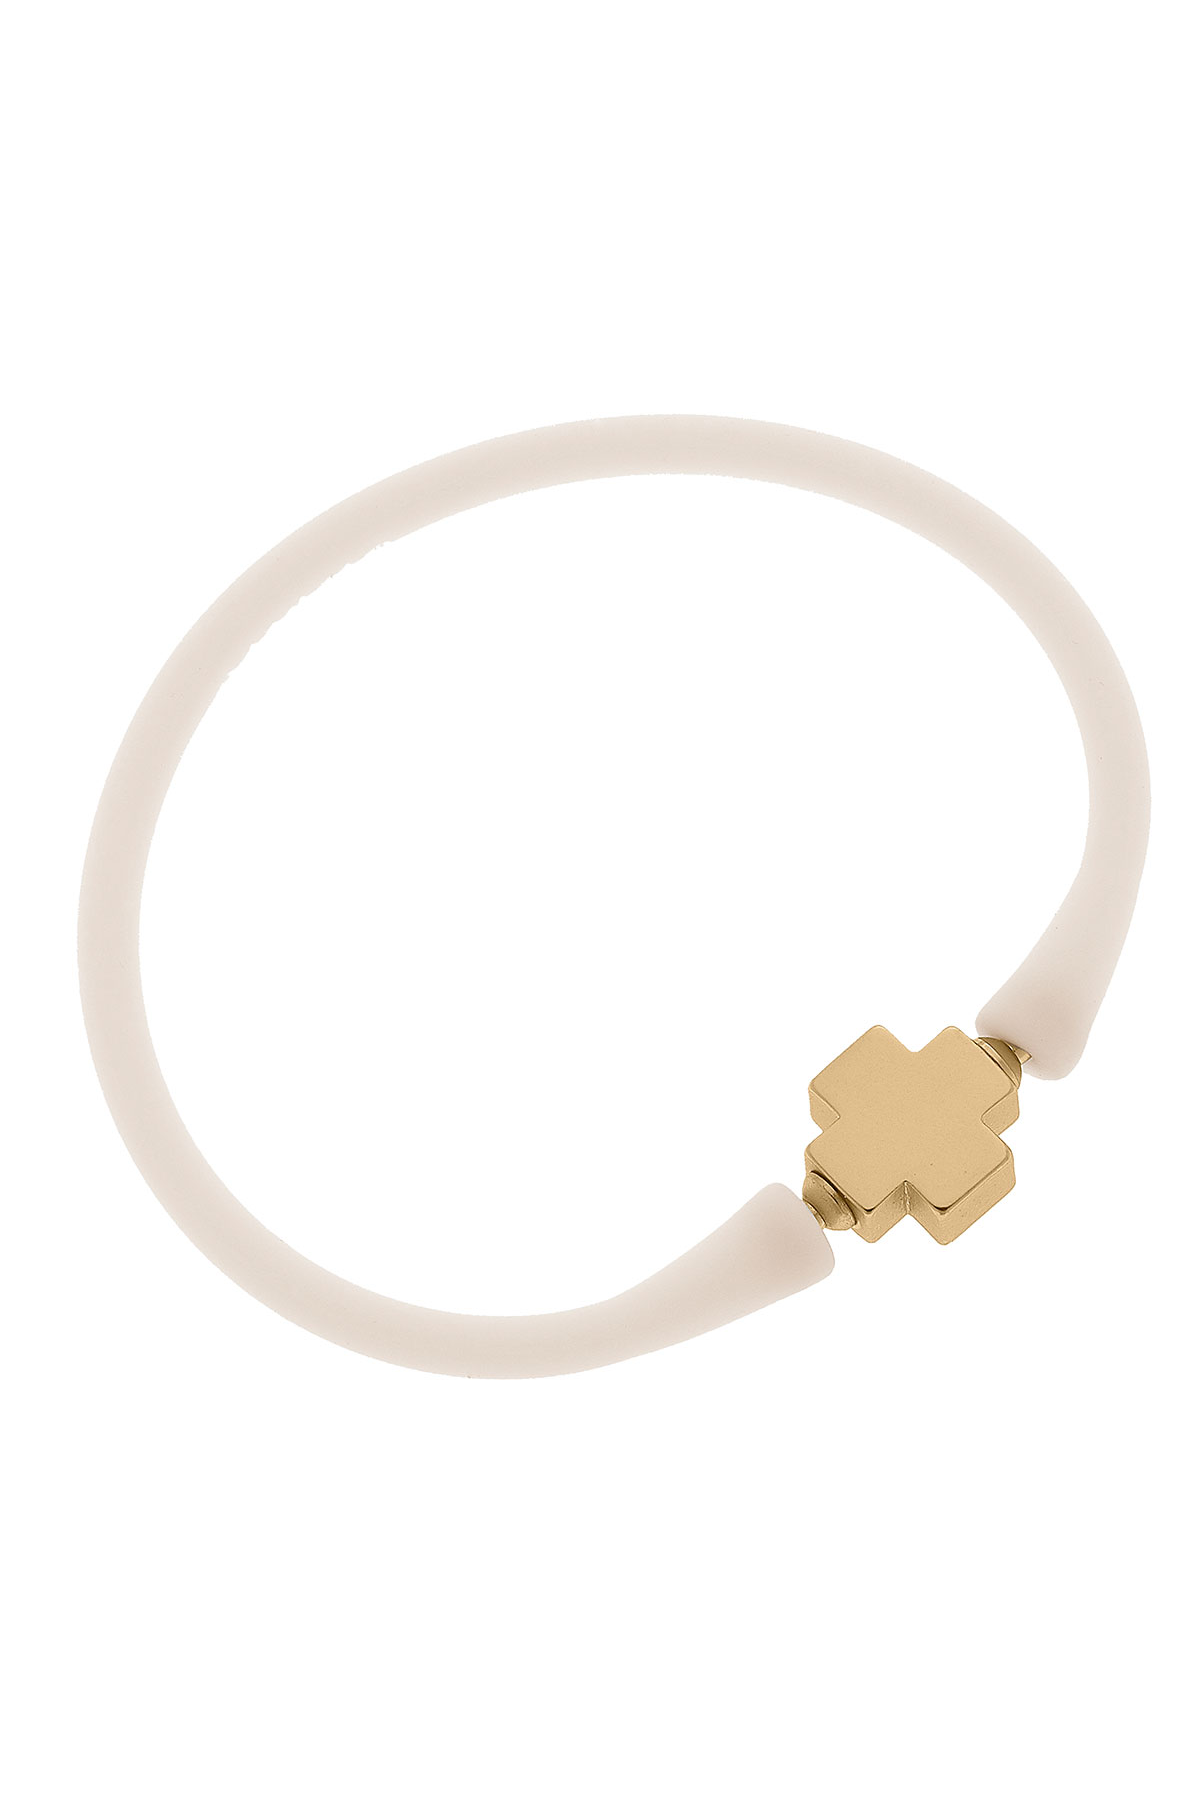 Bali 24K Gold Plated Cross Bead Silicone Bracelet in Eggnog